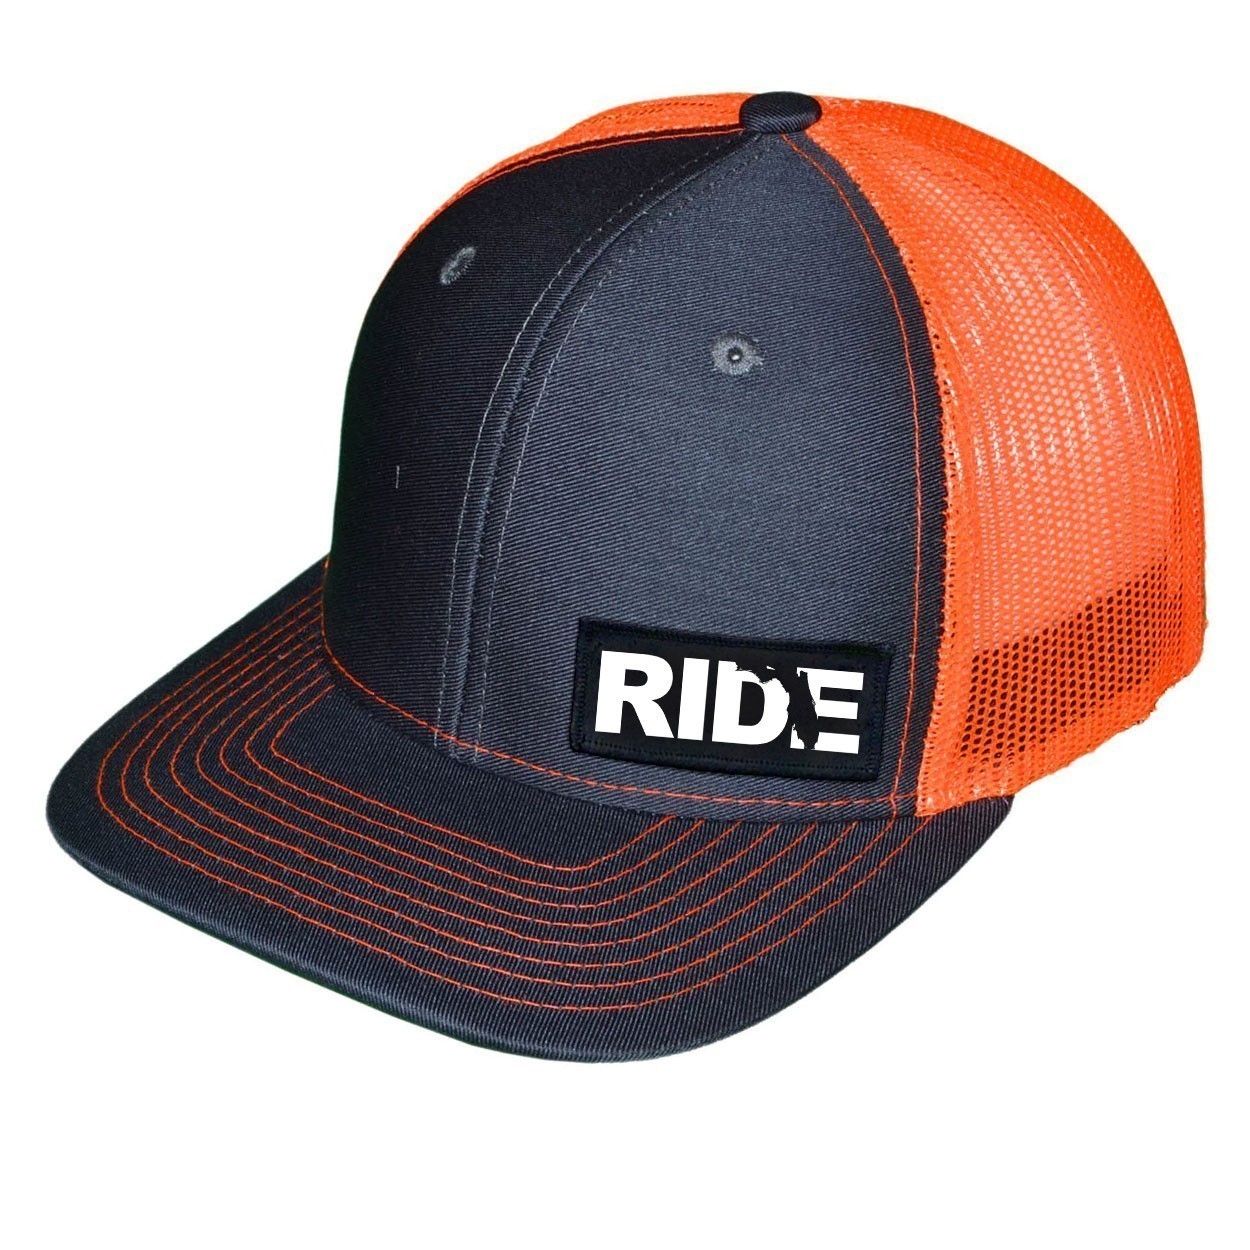 Ride Florida Night Out Woven Patch Snapback Trucker Hat Charcoal/Orange (White Logo)